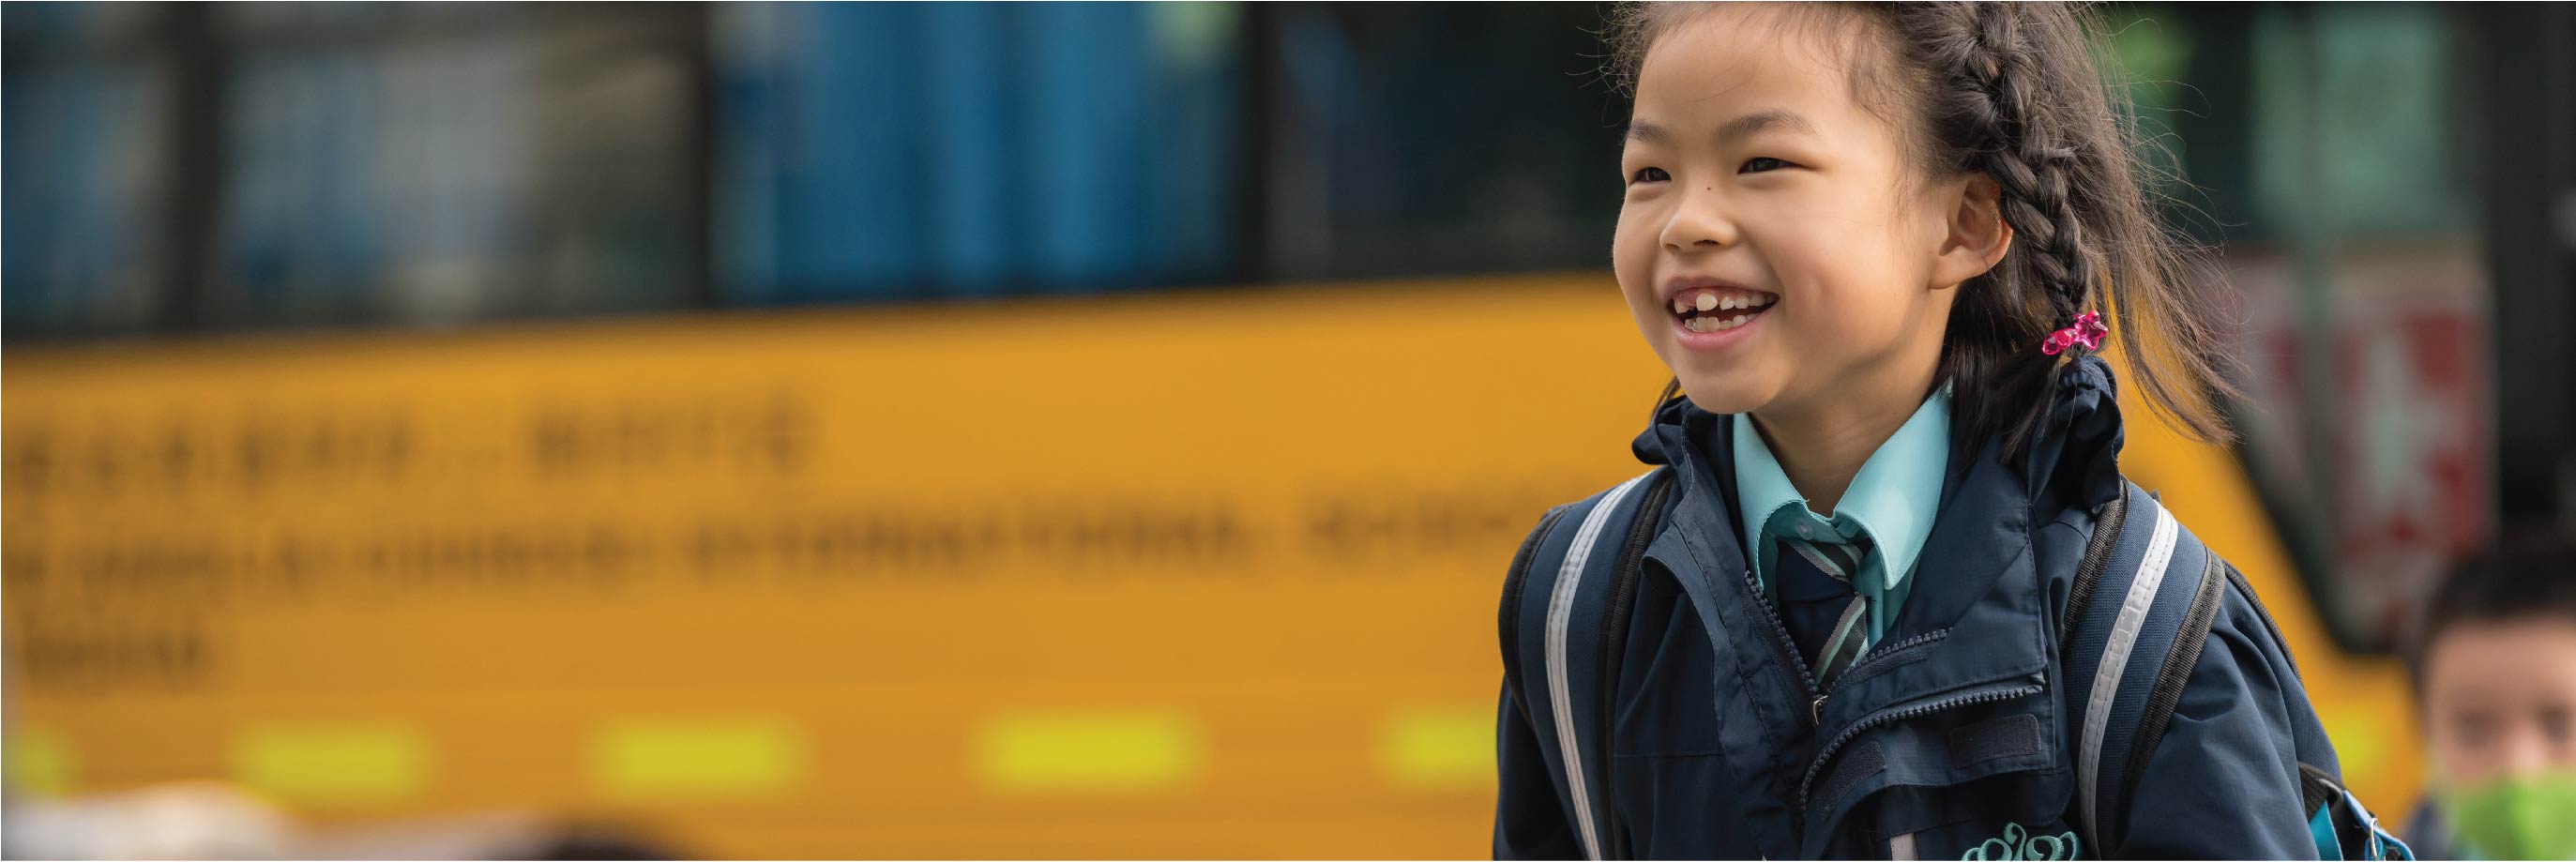 Bus Service | Nord Anglia International School Abu Dhabi - Content Page Header